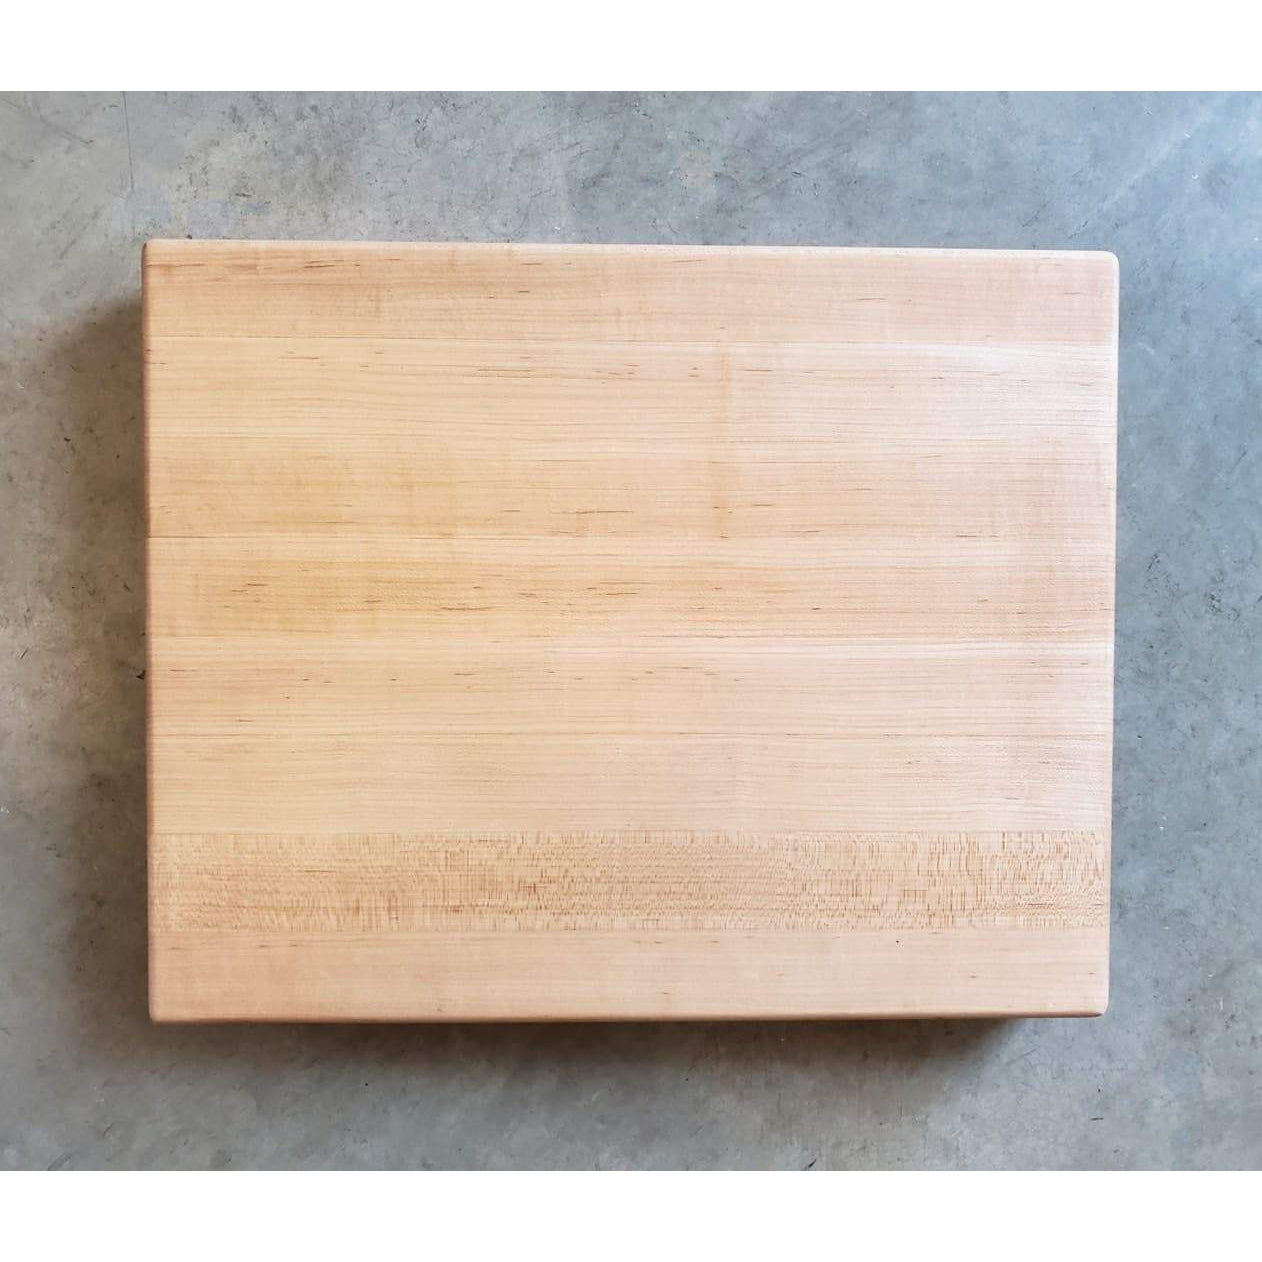 Bamboo Vs. Maple Cutting Board: Pros & Cons Of Each - Chef's Vision